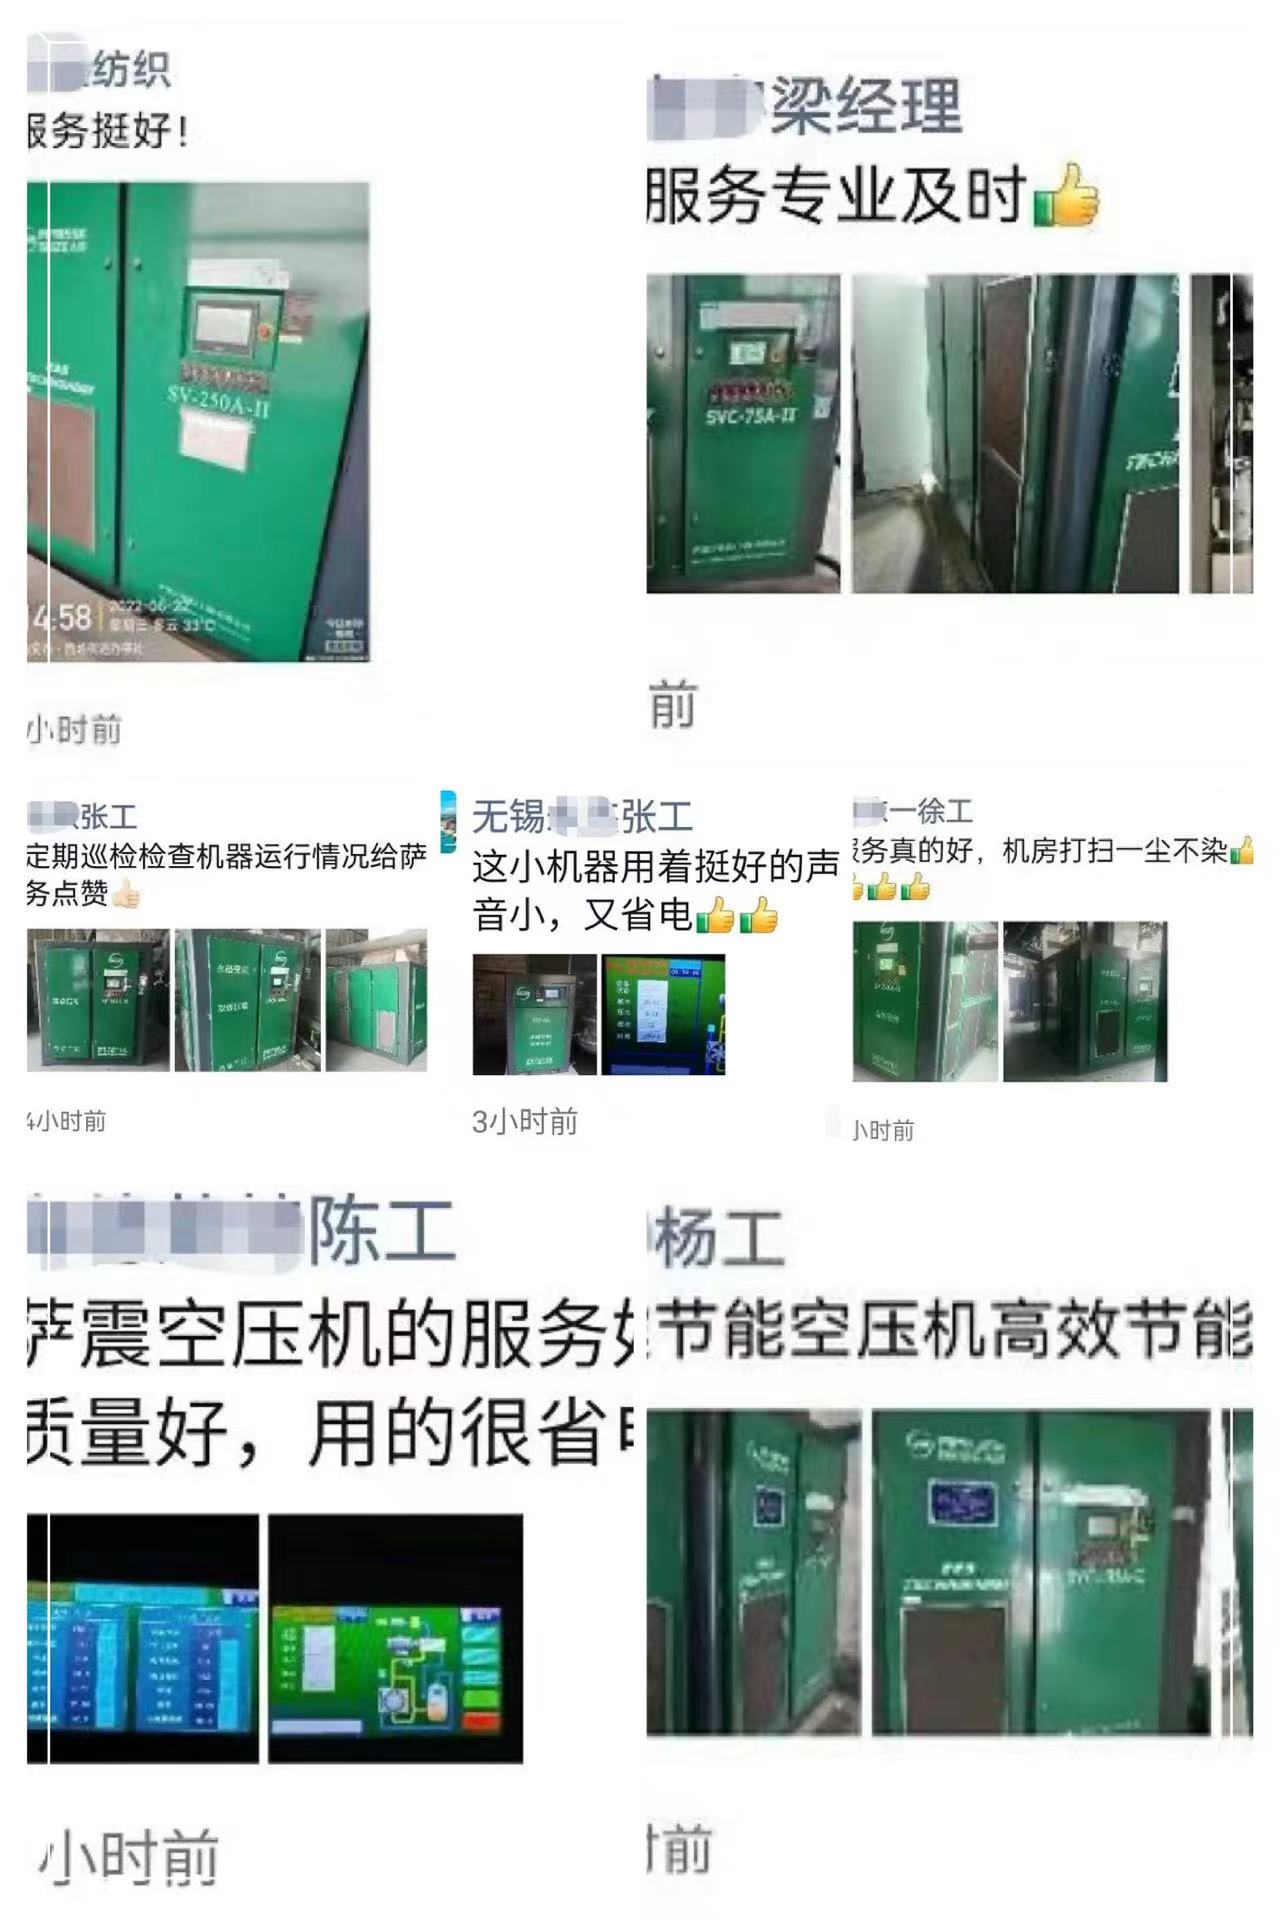 Seize air compressor get lots of good feedback from Clients